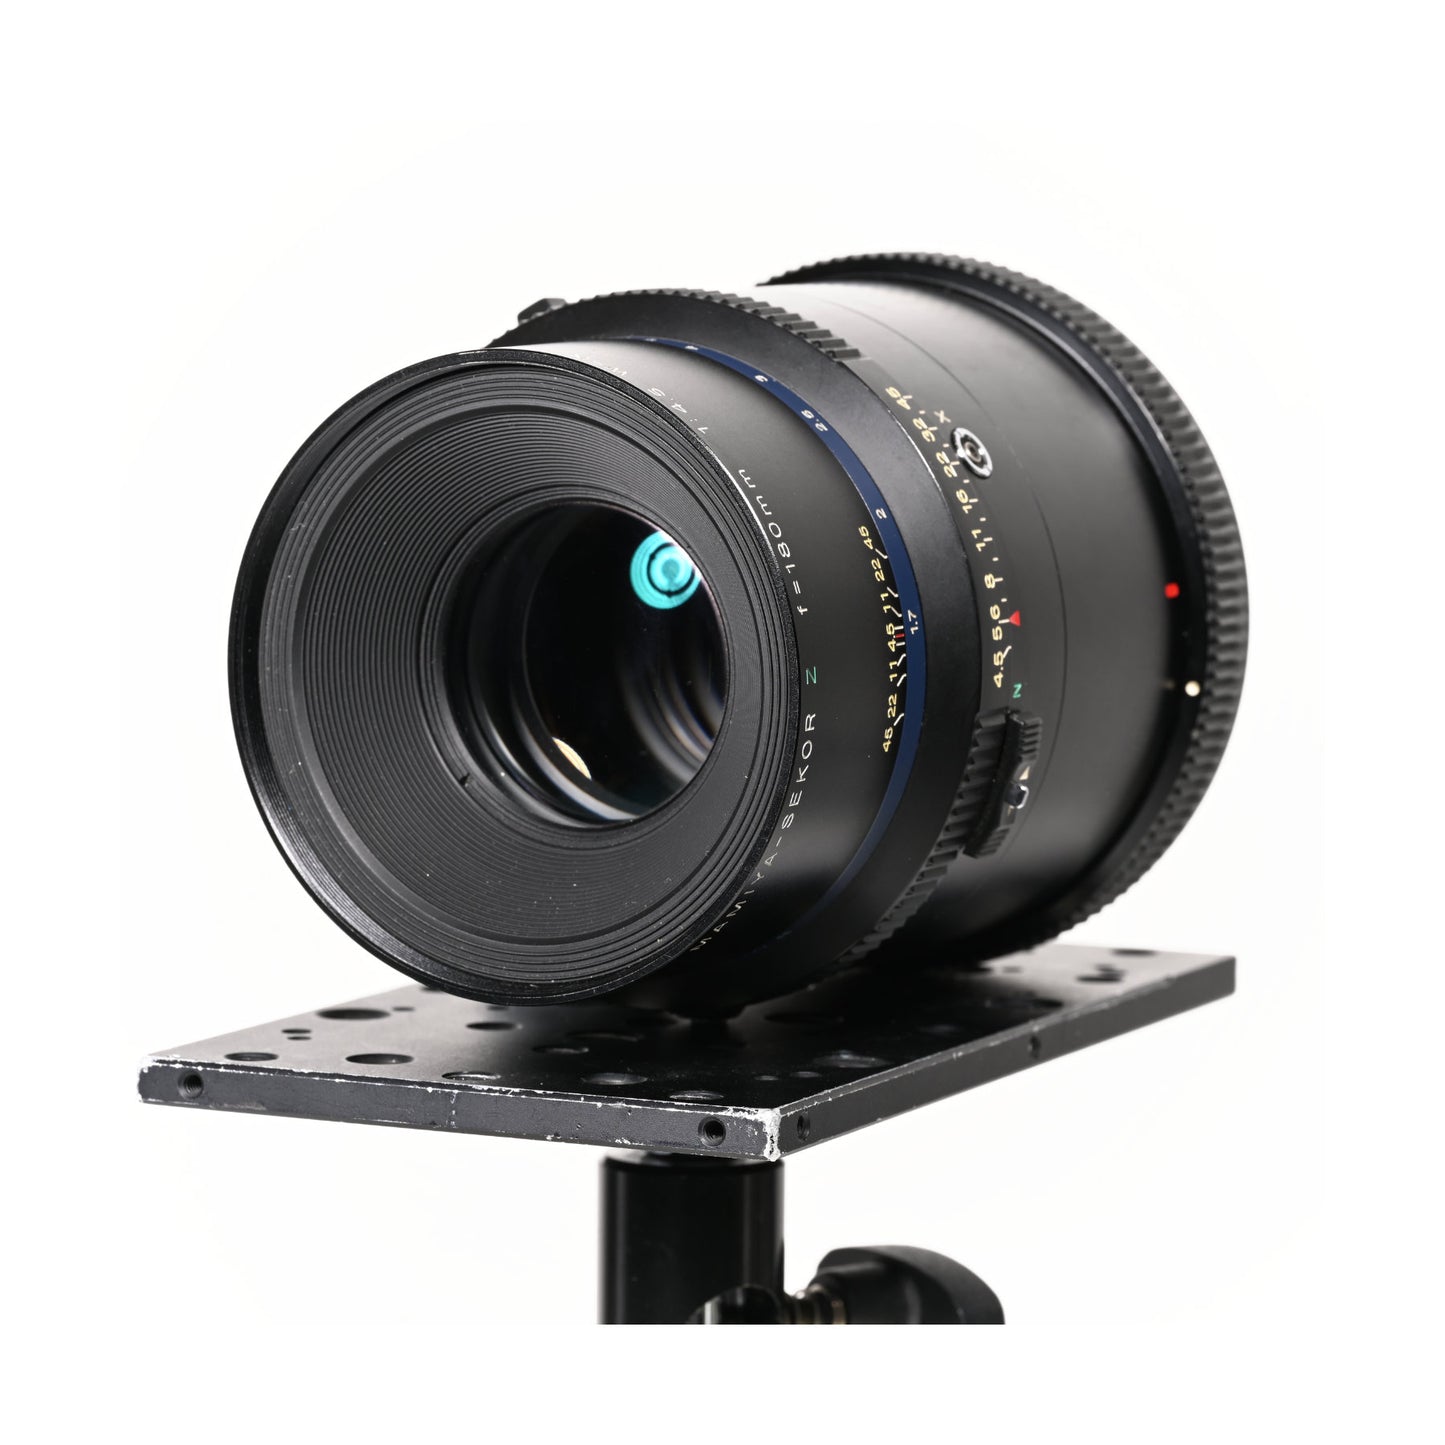 Buy Mamiya Sekor Z 180mm F4.5 W/N - Second Hand at Topic Store